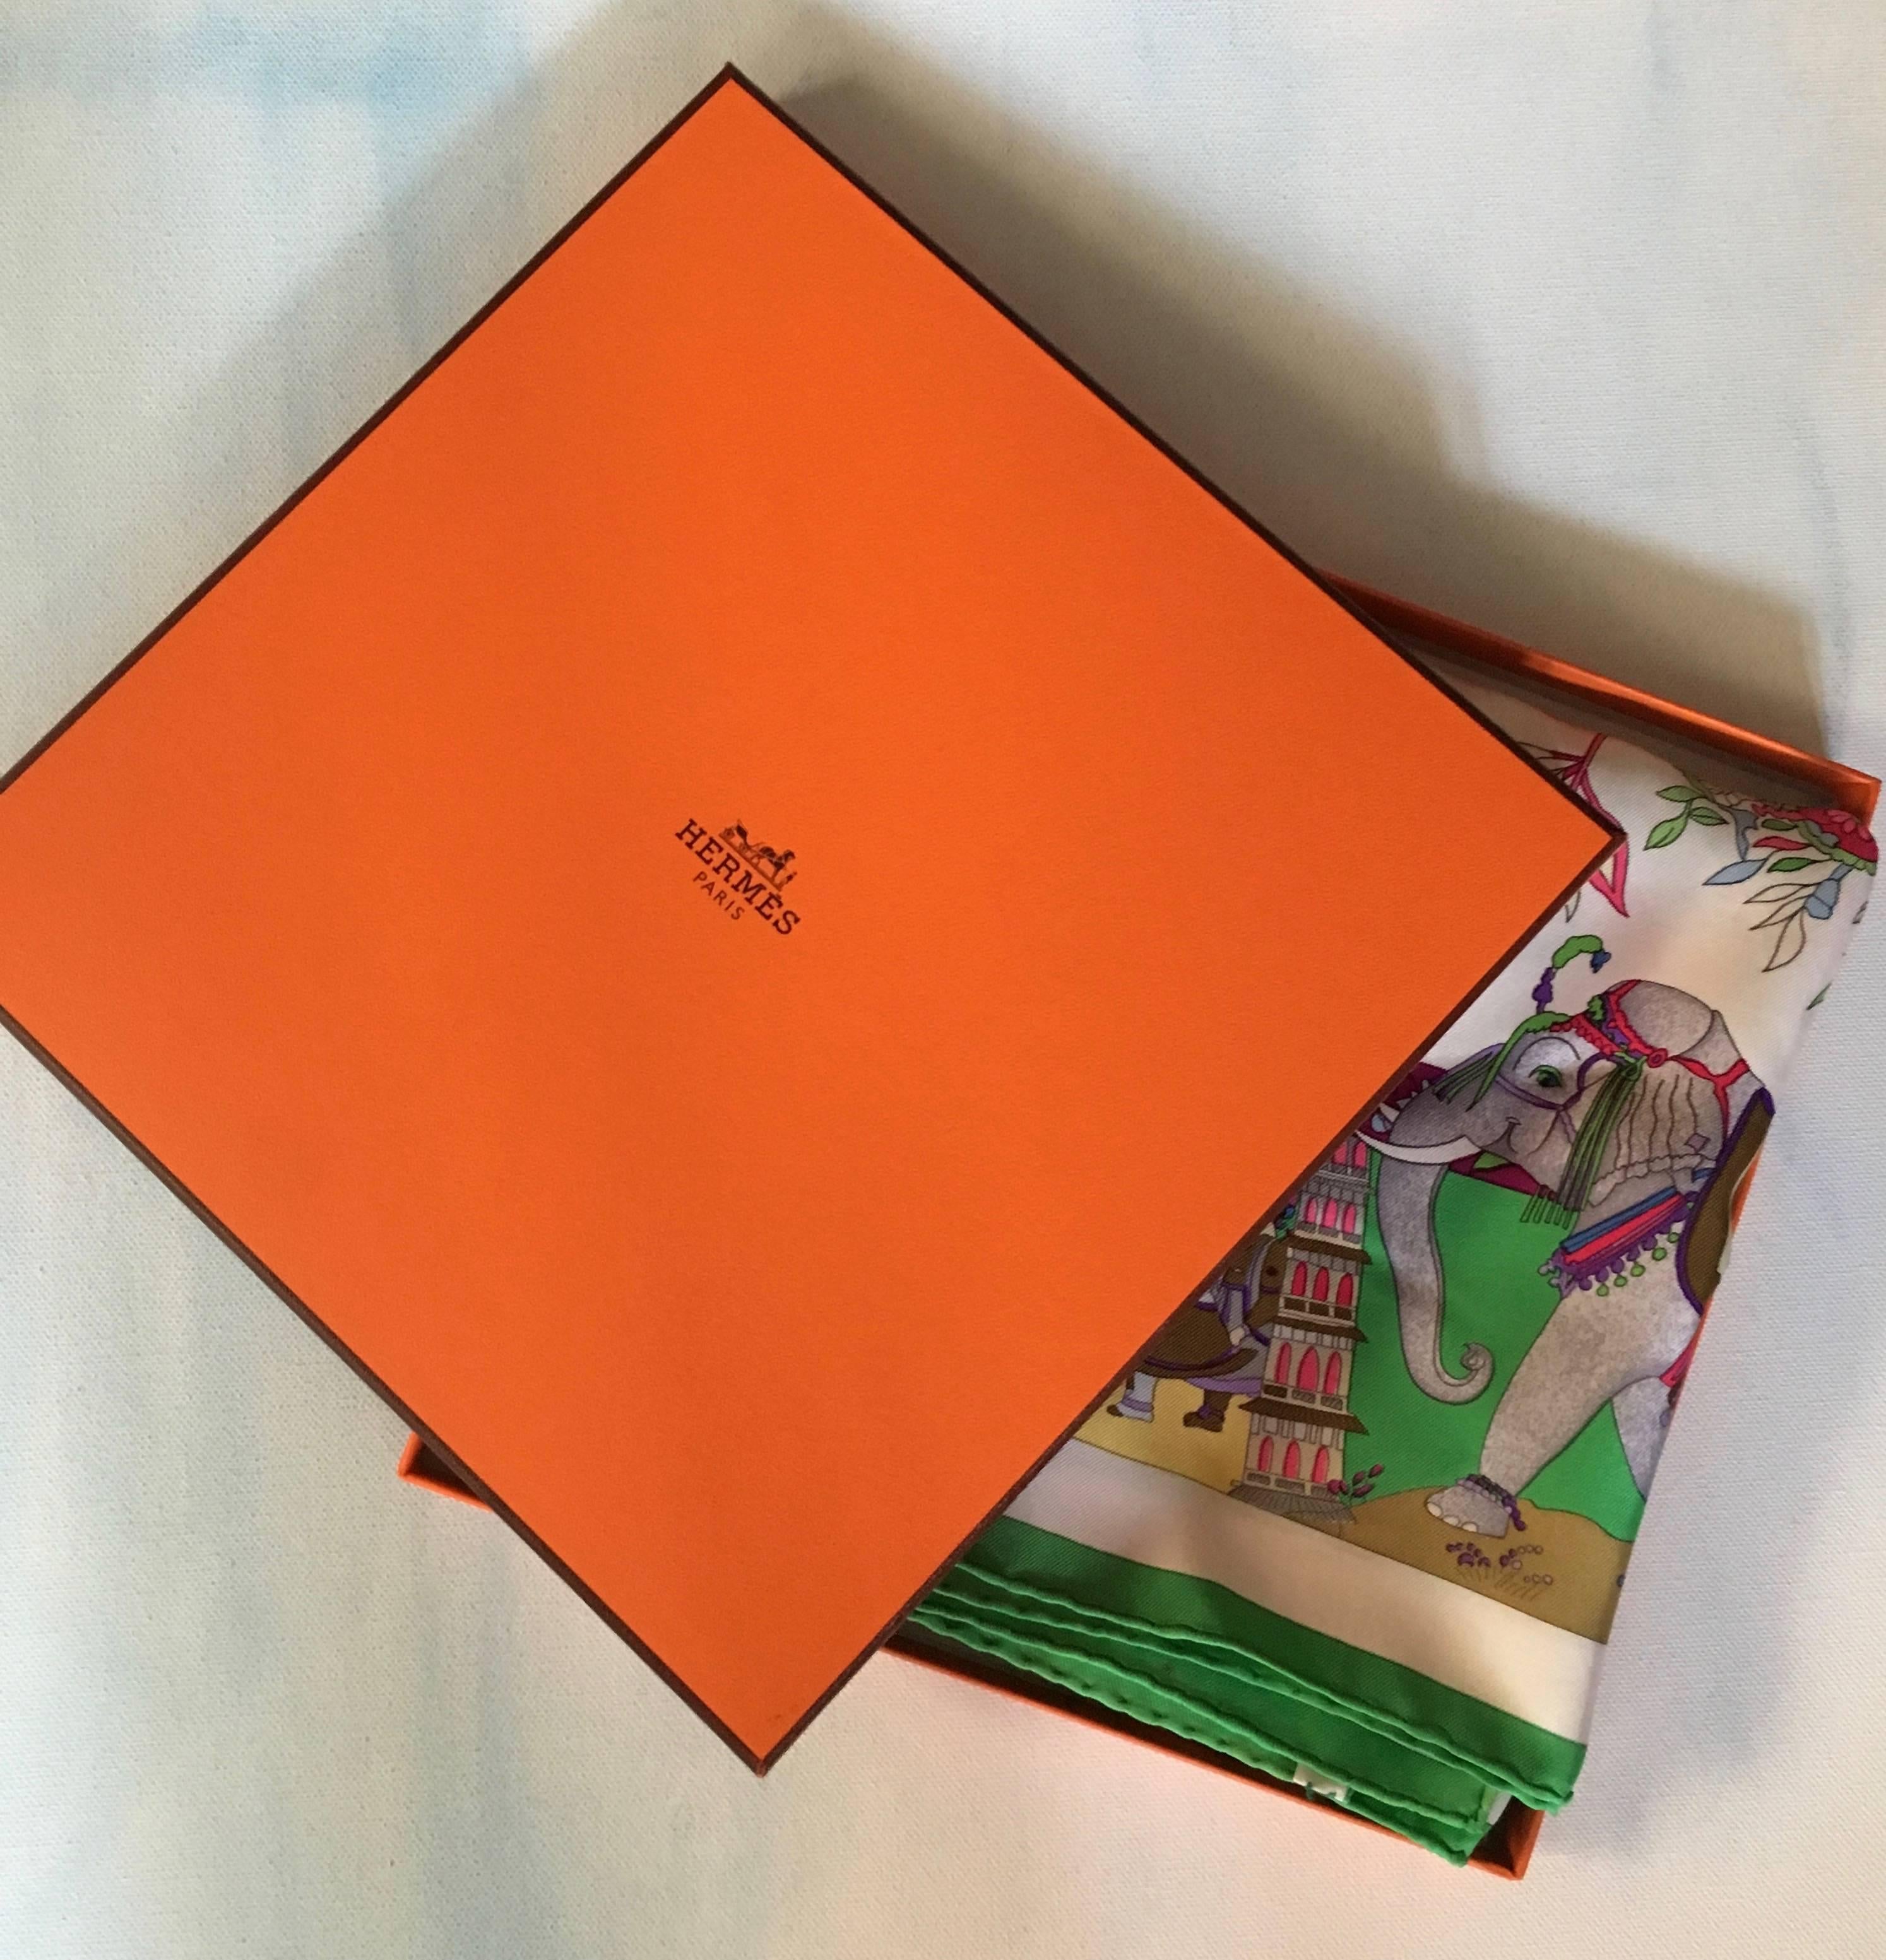 Vintage Hermes Paris Loic Dubipeon Fantasies Indiennes Scarf - The vibrant colors of this beautifully designed piece are the perfect backdrop for the exciting elements of India and all of it's textures and rich history.

This piece is a great